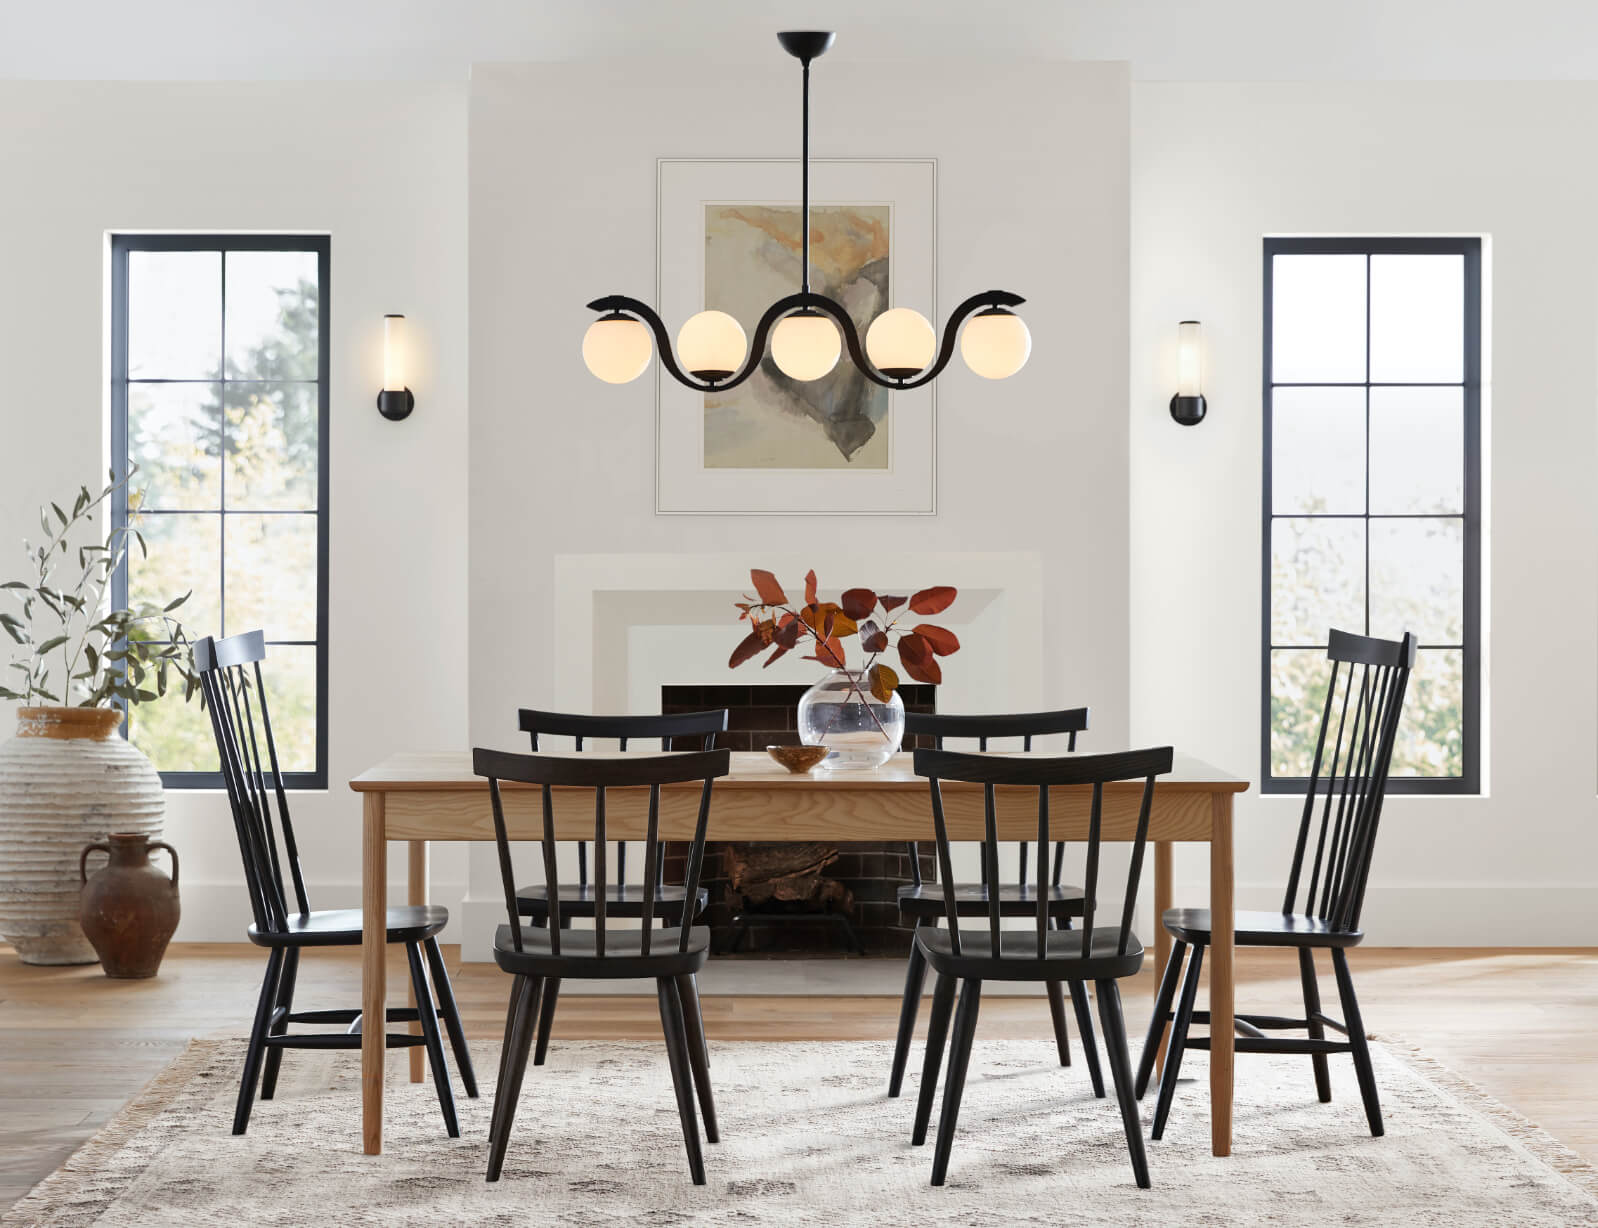 How To Choose Dining Room Lighting, Chandelier Over Dining Room Table Height